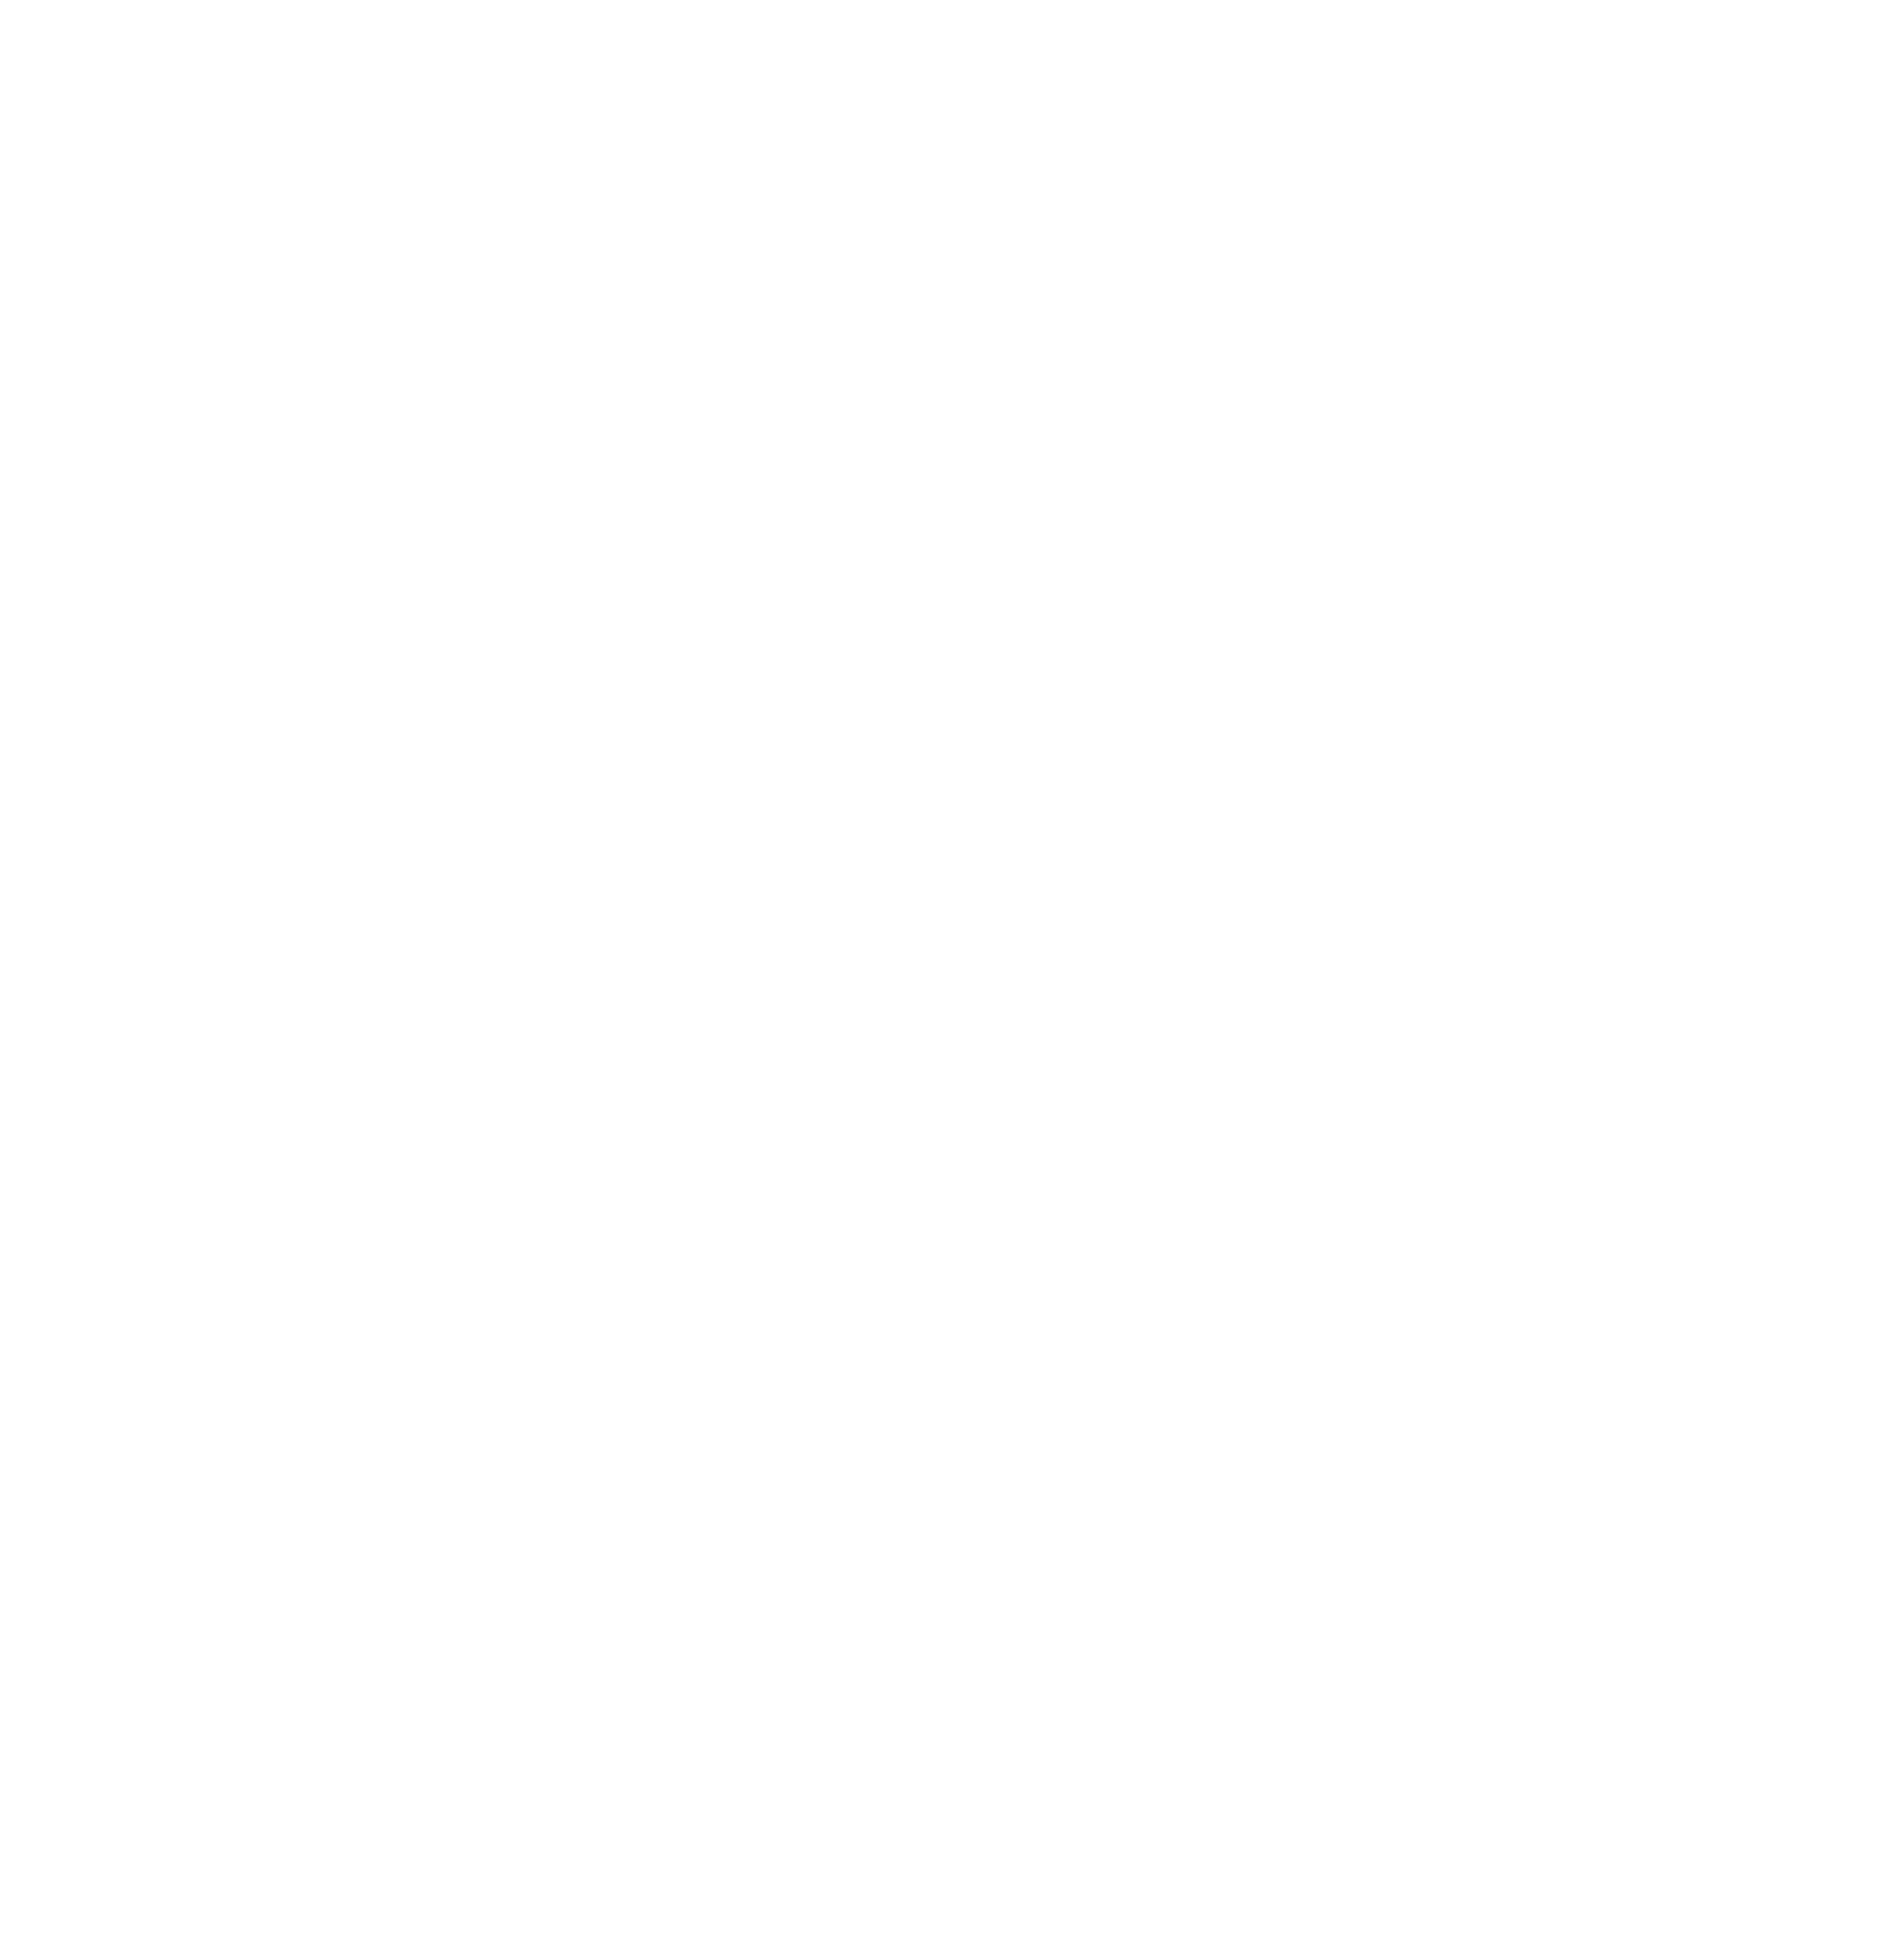 Educational Quality Certificate